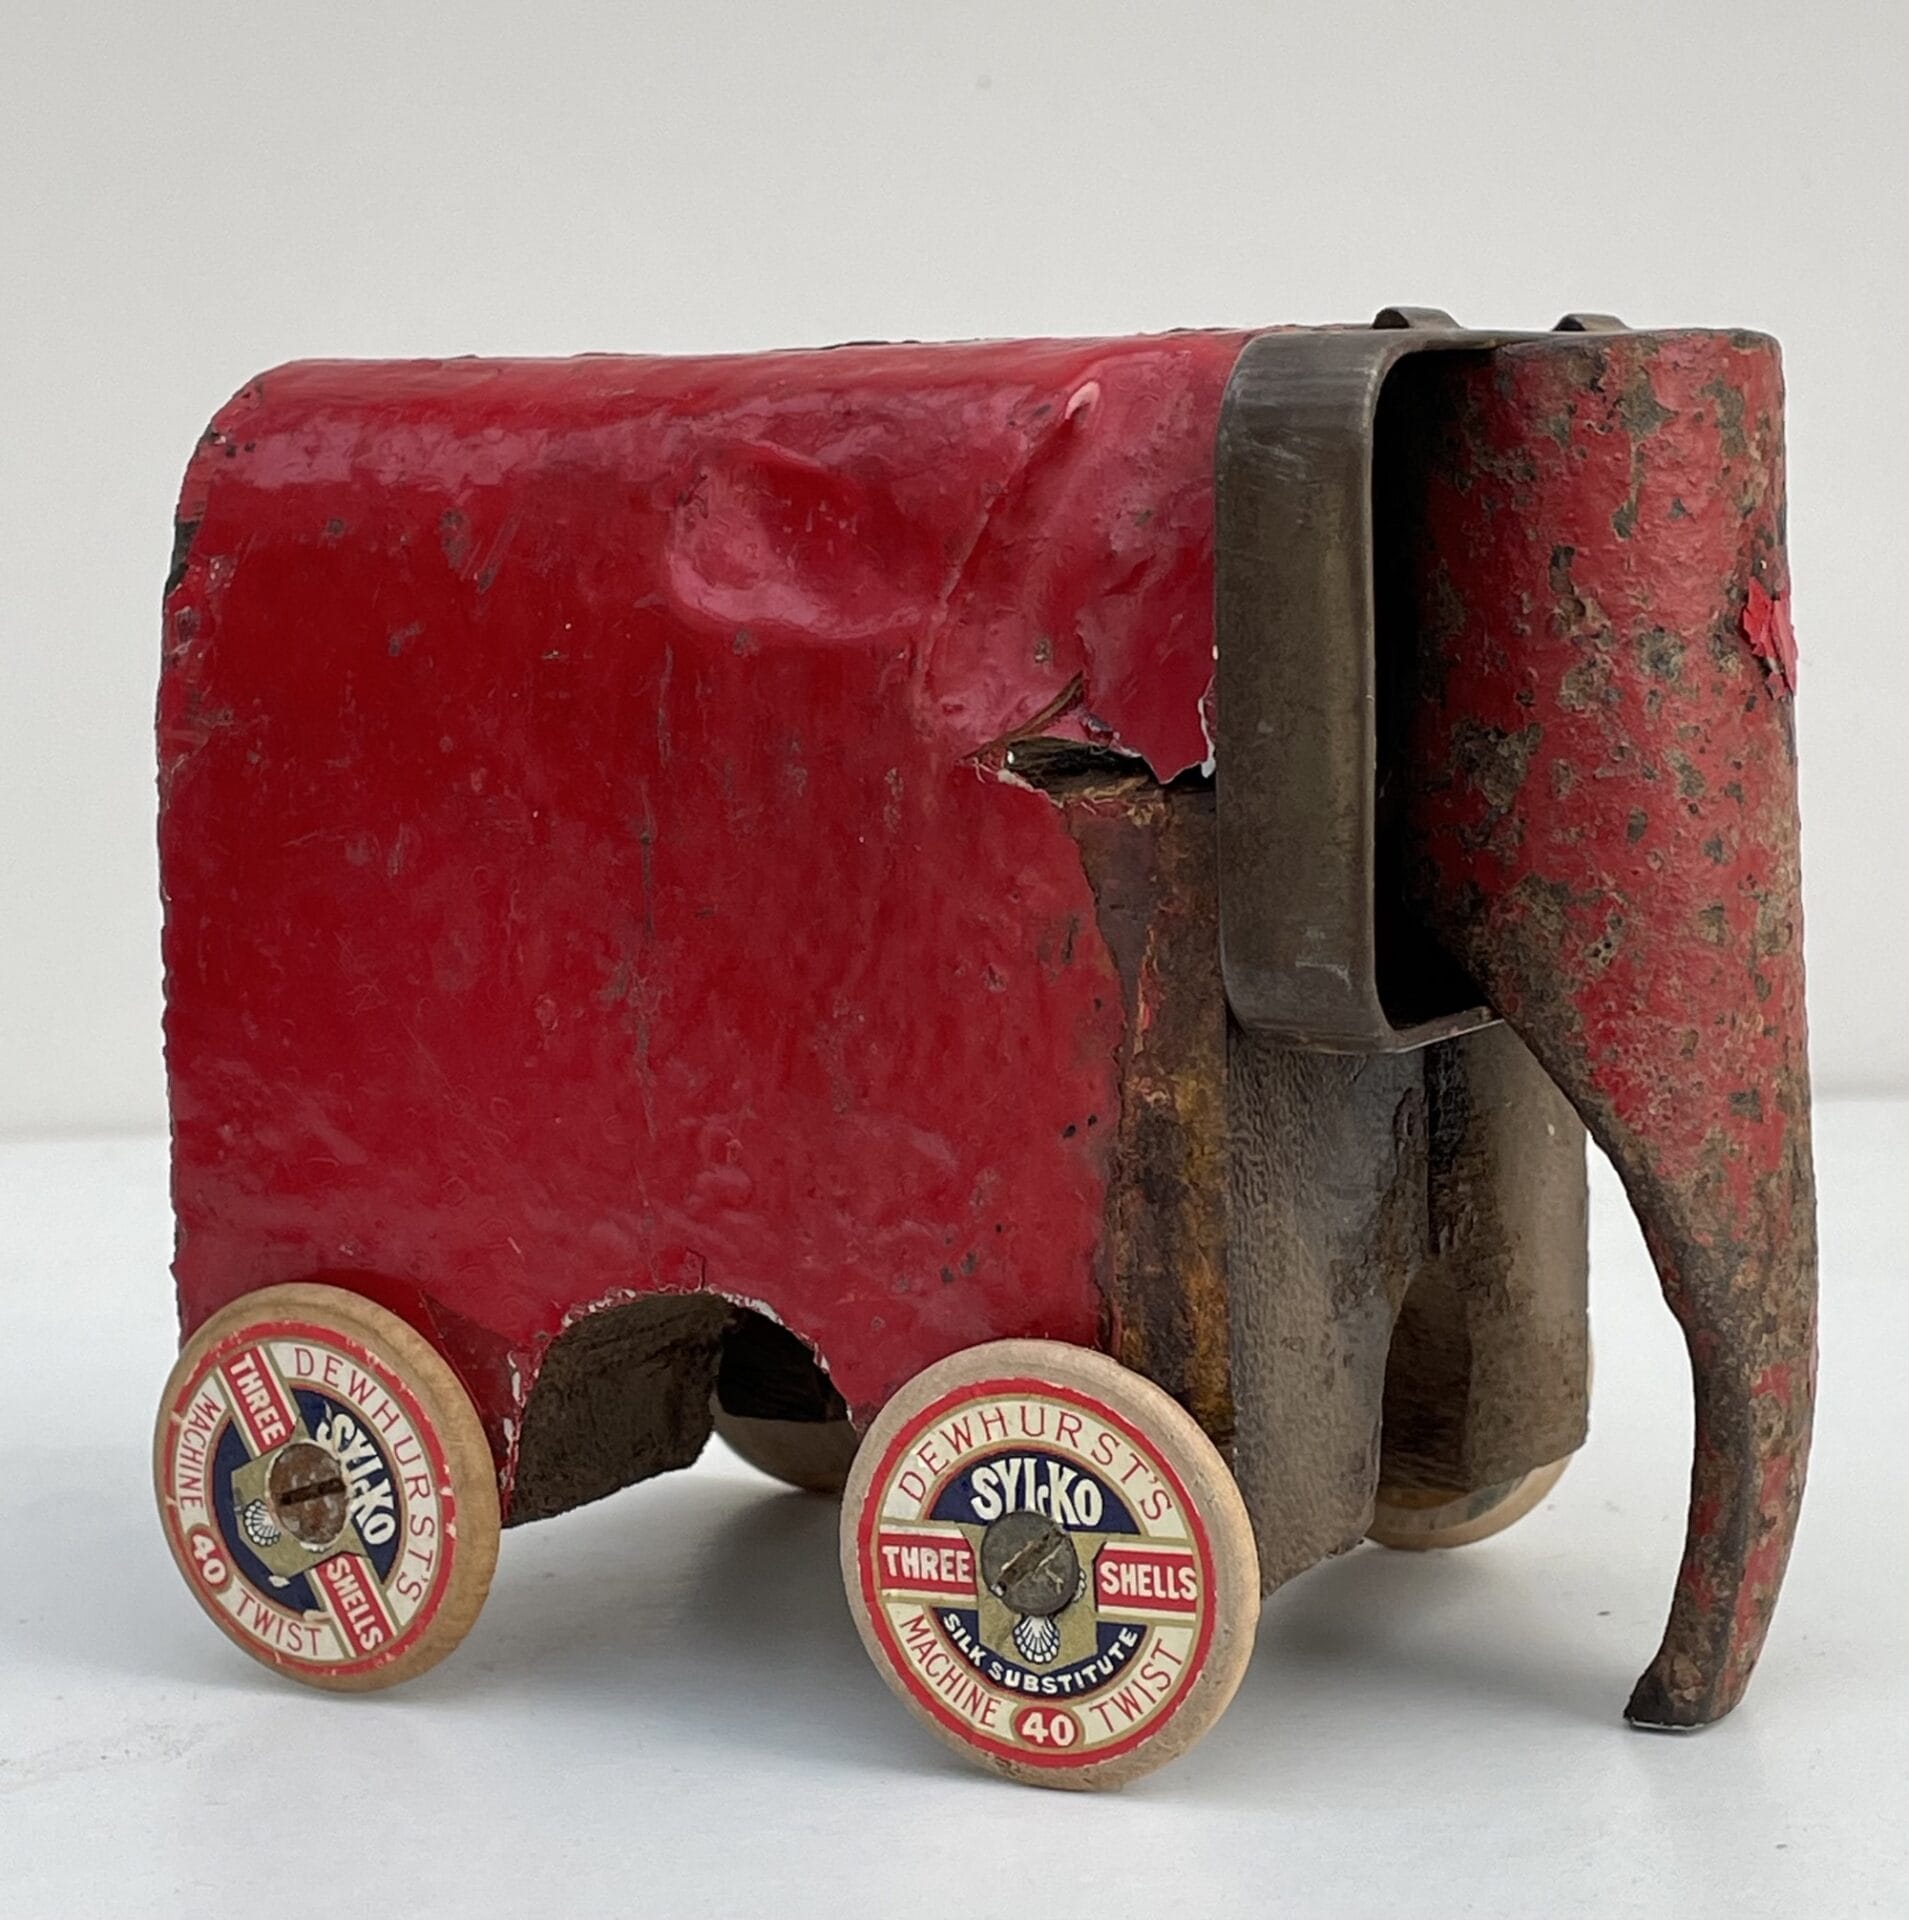 a small sculpture of an elephant made from old metal and some sewing machine elements